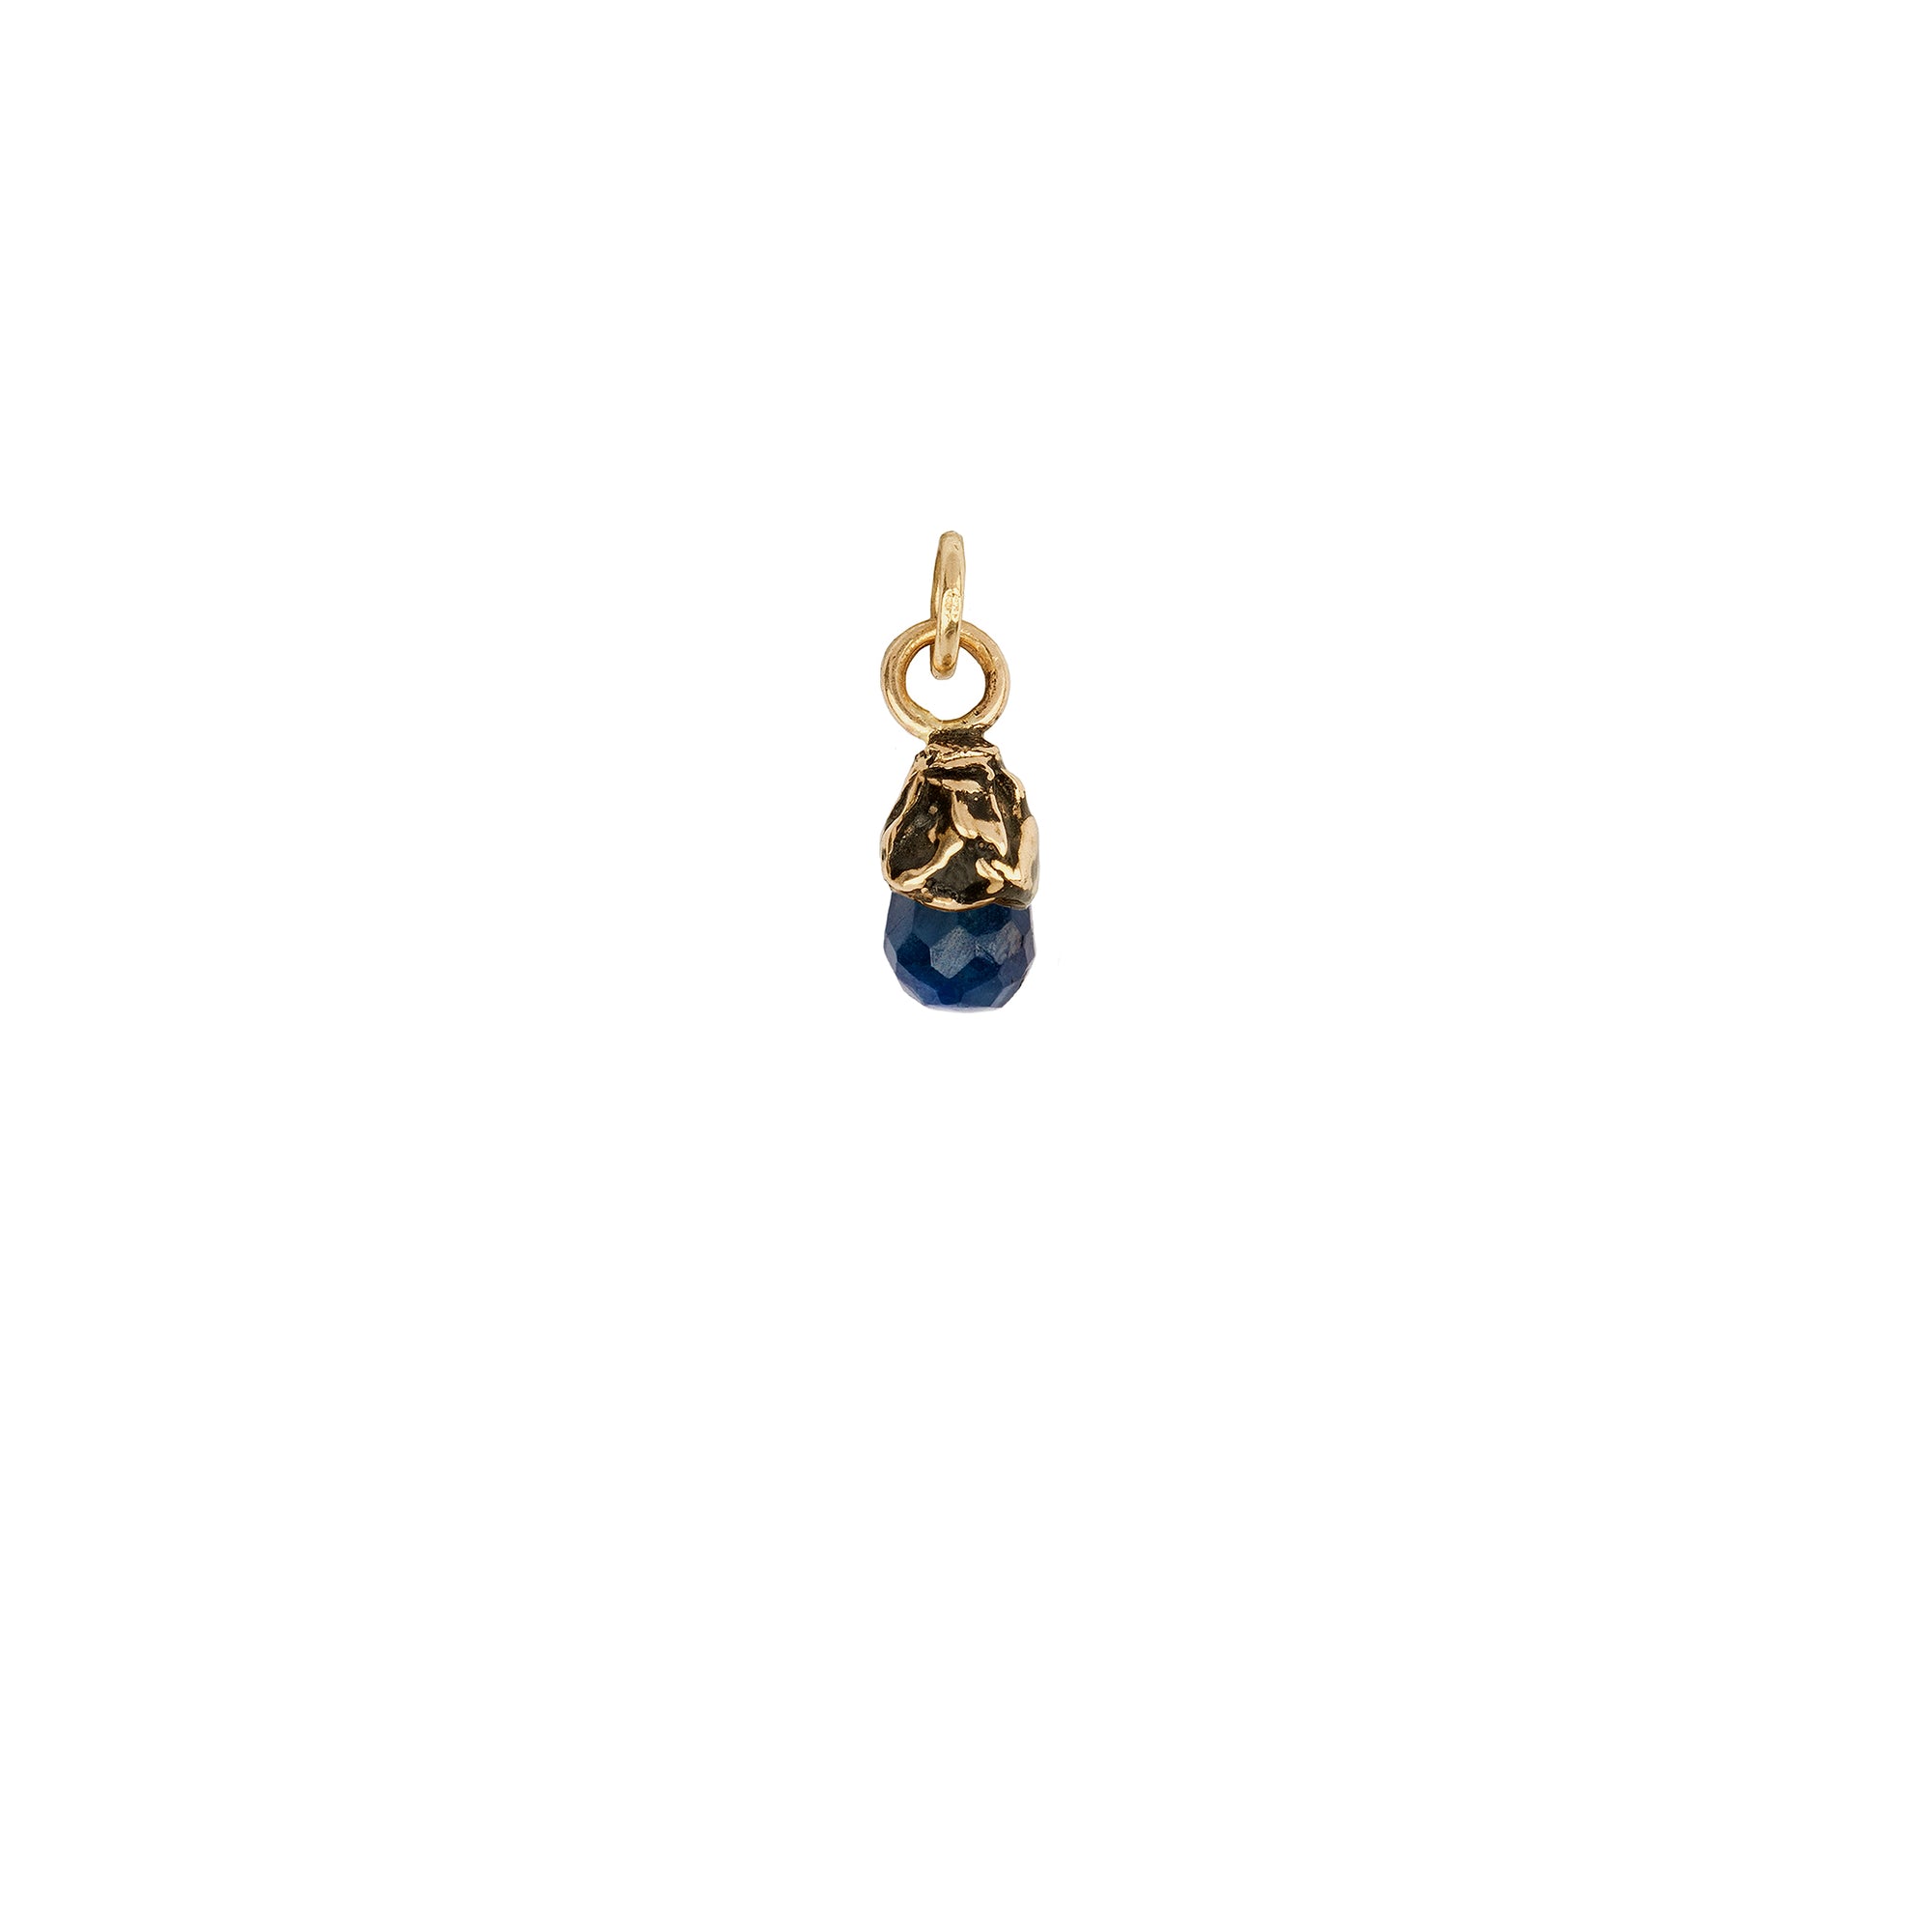 Loyalty 14K Gold Capped Attraction Charm